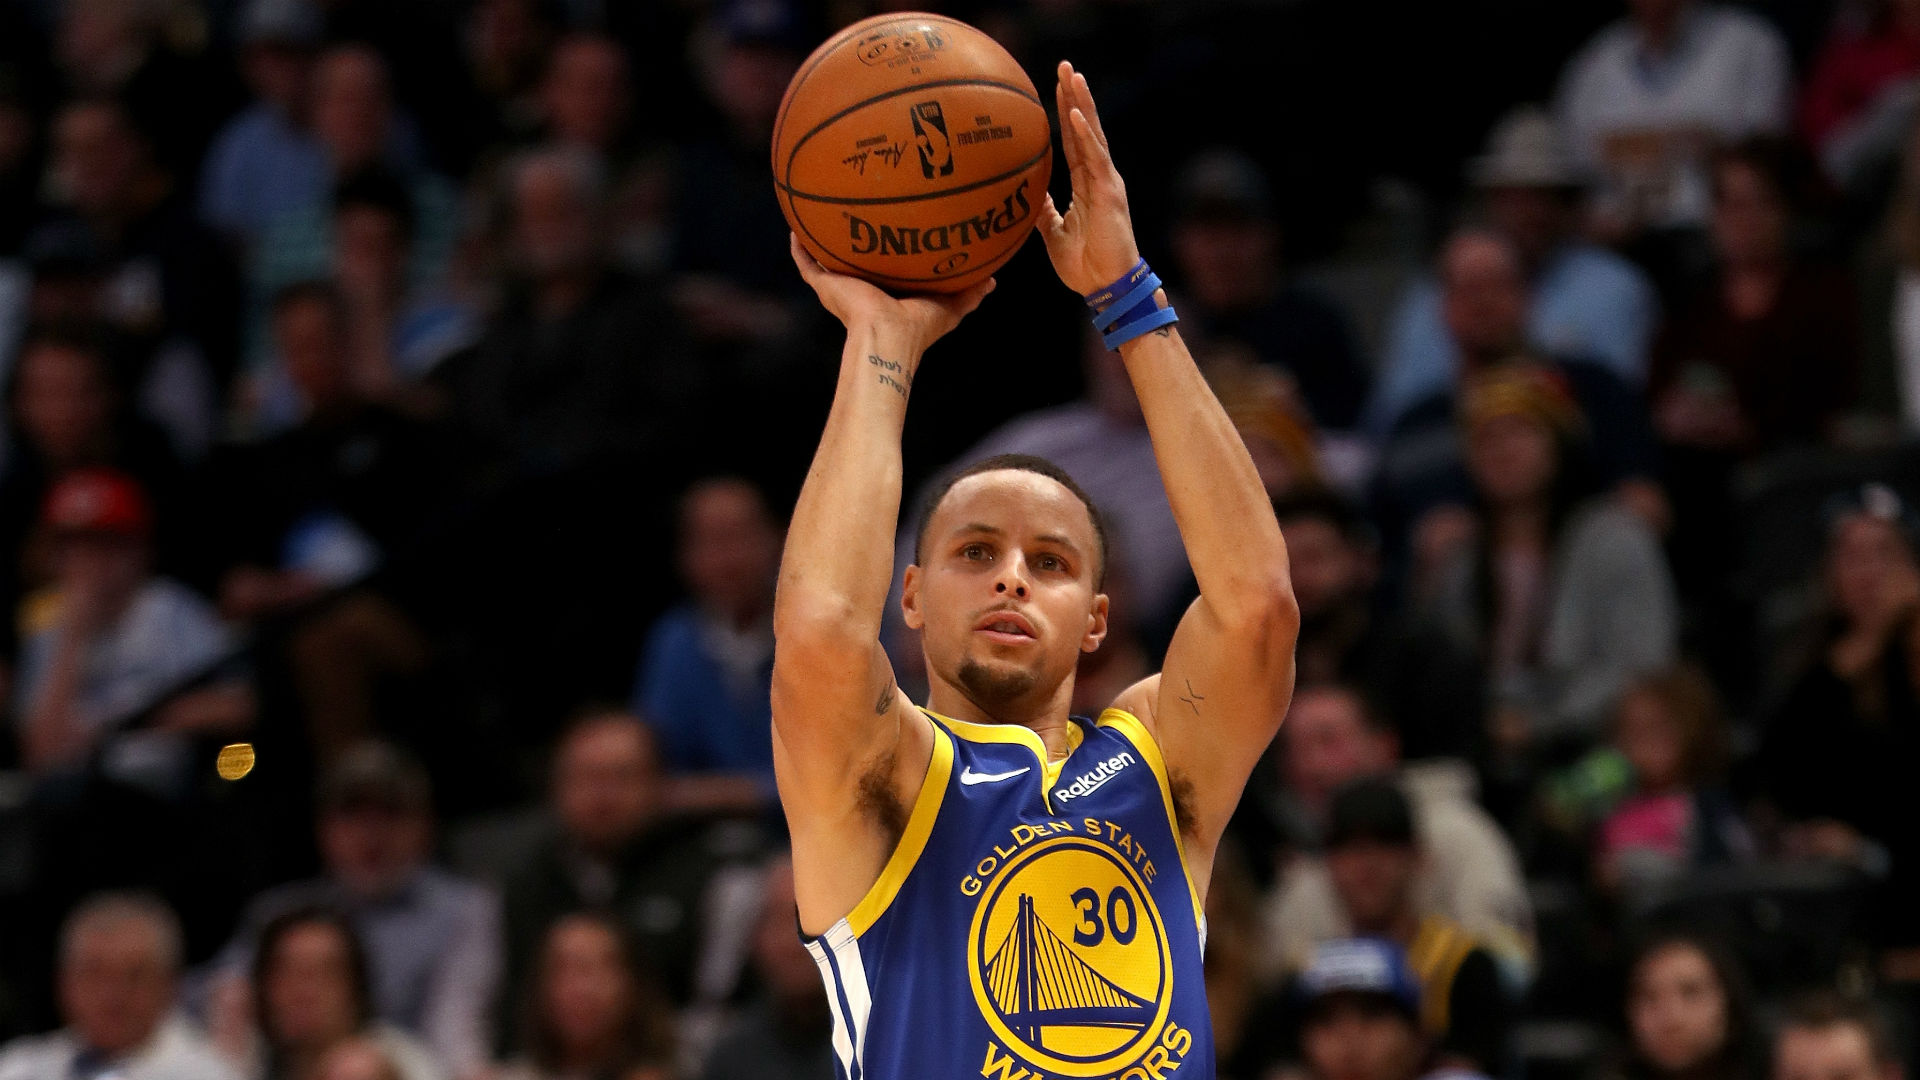 The Golden State Warriors knocked down a franchise-record 10 three-pointers in their 51-point first quarter on Tuesday.